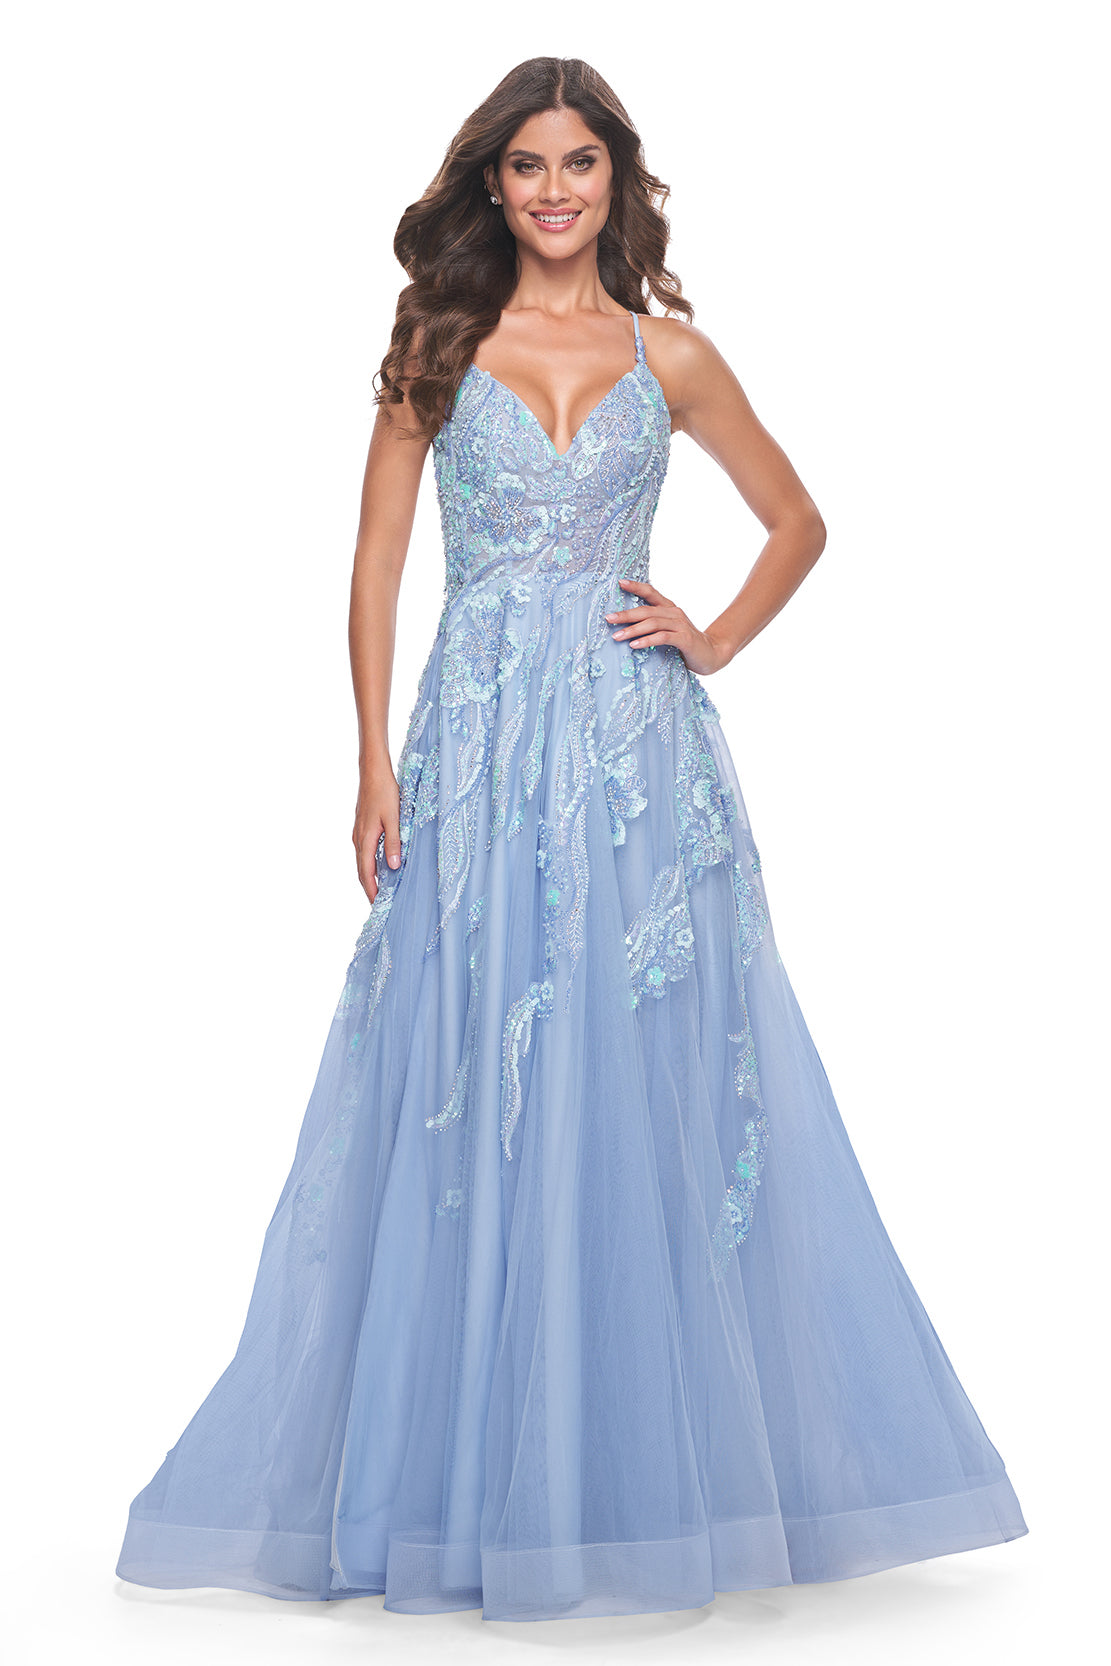 La Femme 32032 Enchanting A-Line Prom Gown - A captivating gown featuring a unique sequin beaded applique, A-line silhouette, V-shaped neckline, and adjustable lace-up back. Ideal for prom night.  Model is wearing the dress in cloud blue.